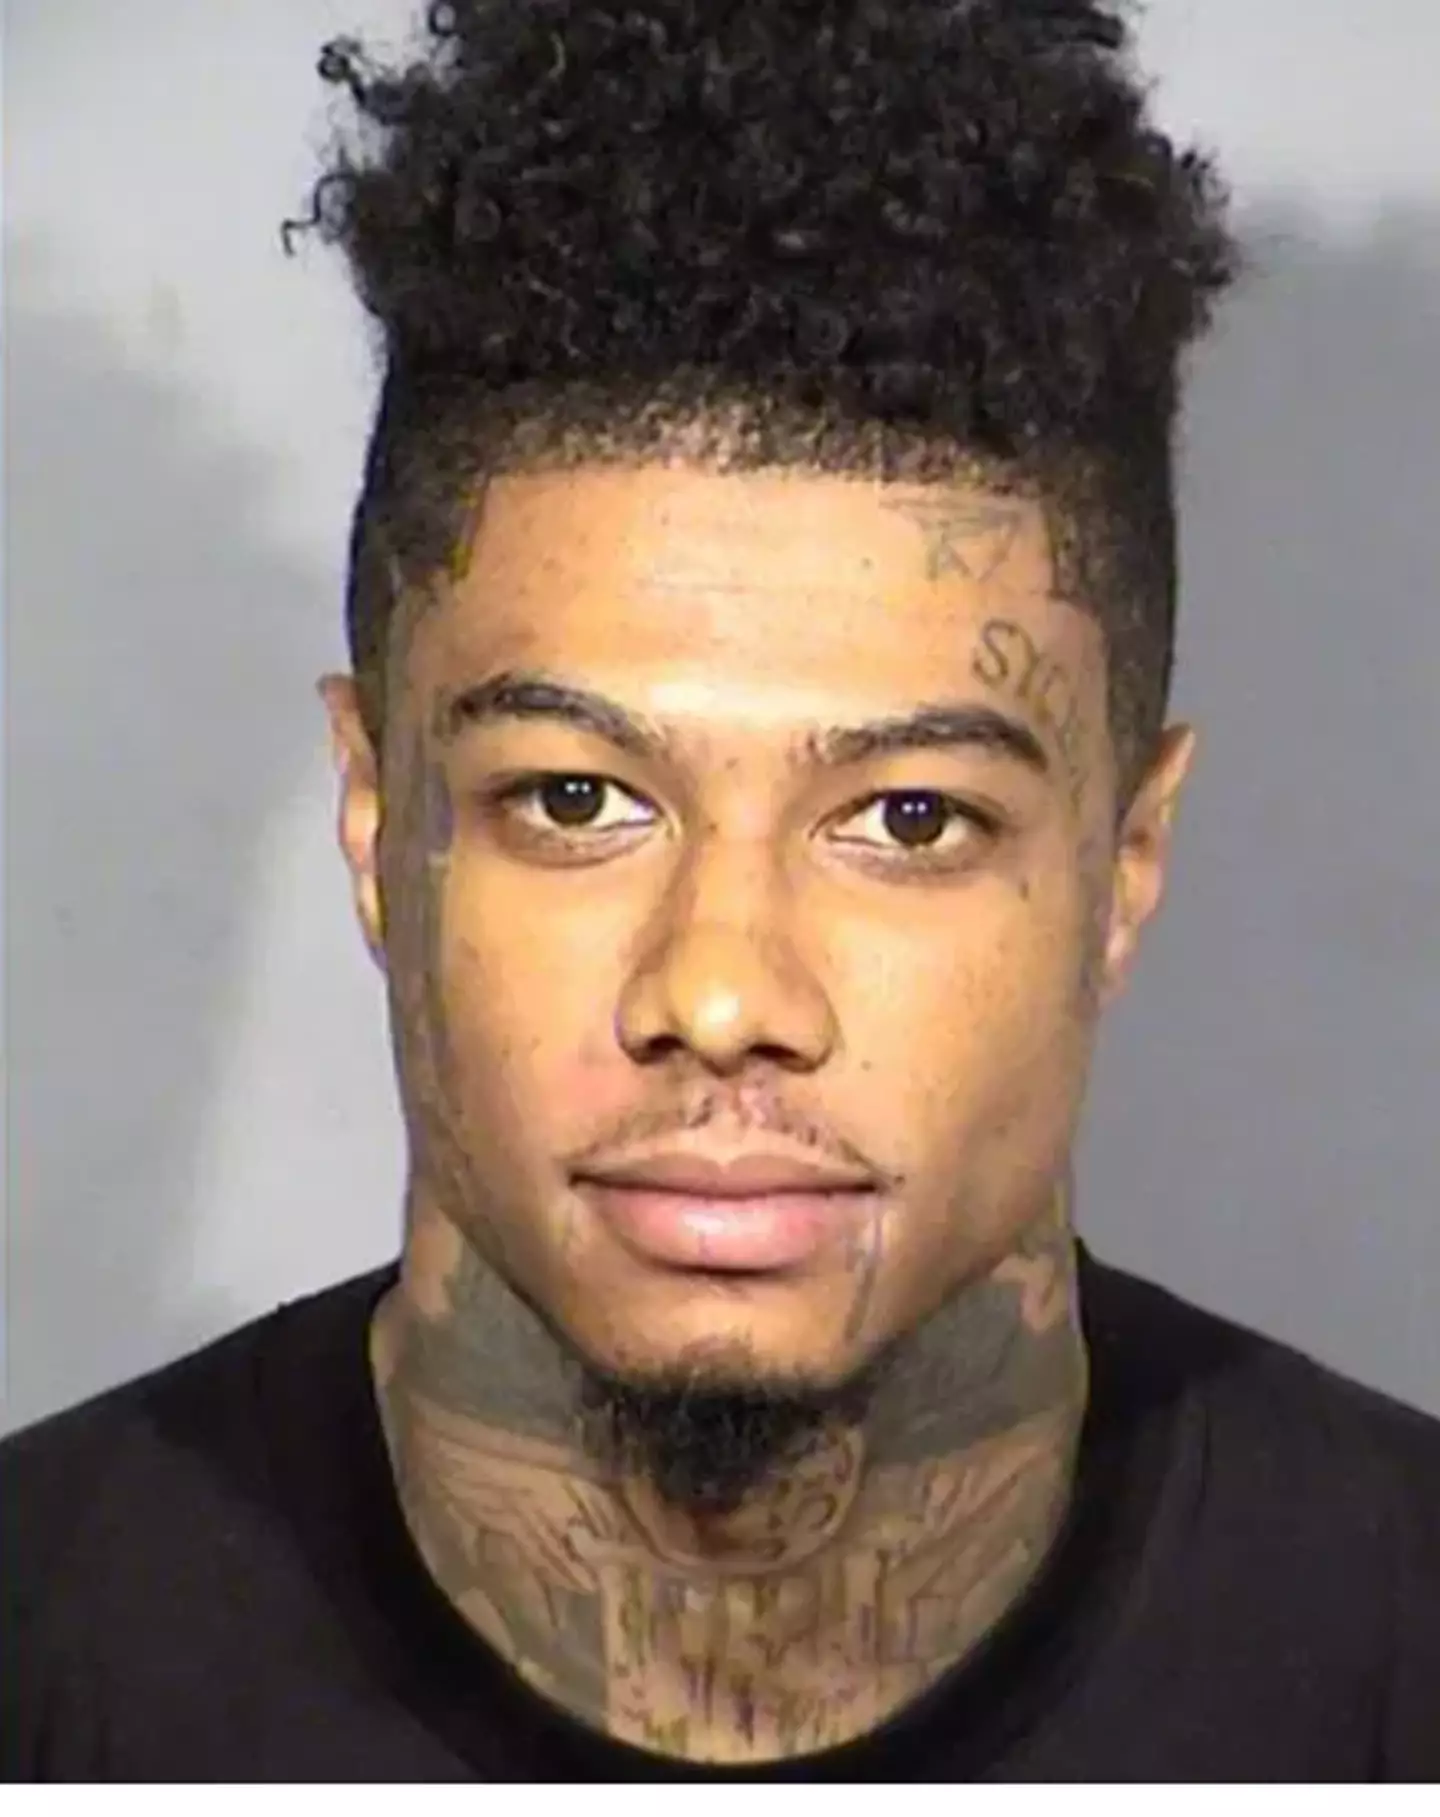 Rock revealed that she had got a tattoo of Blueface’s mugshot on her face.